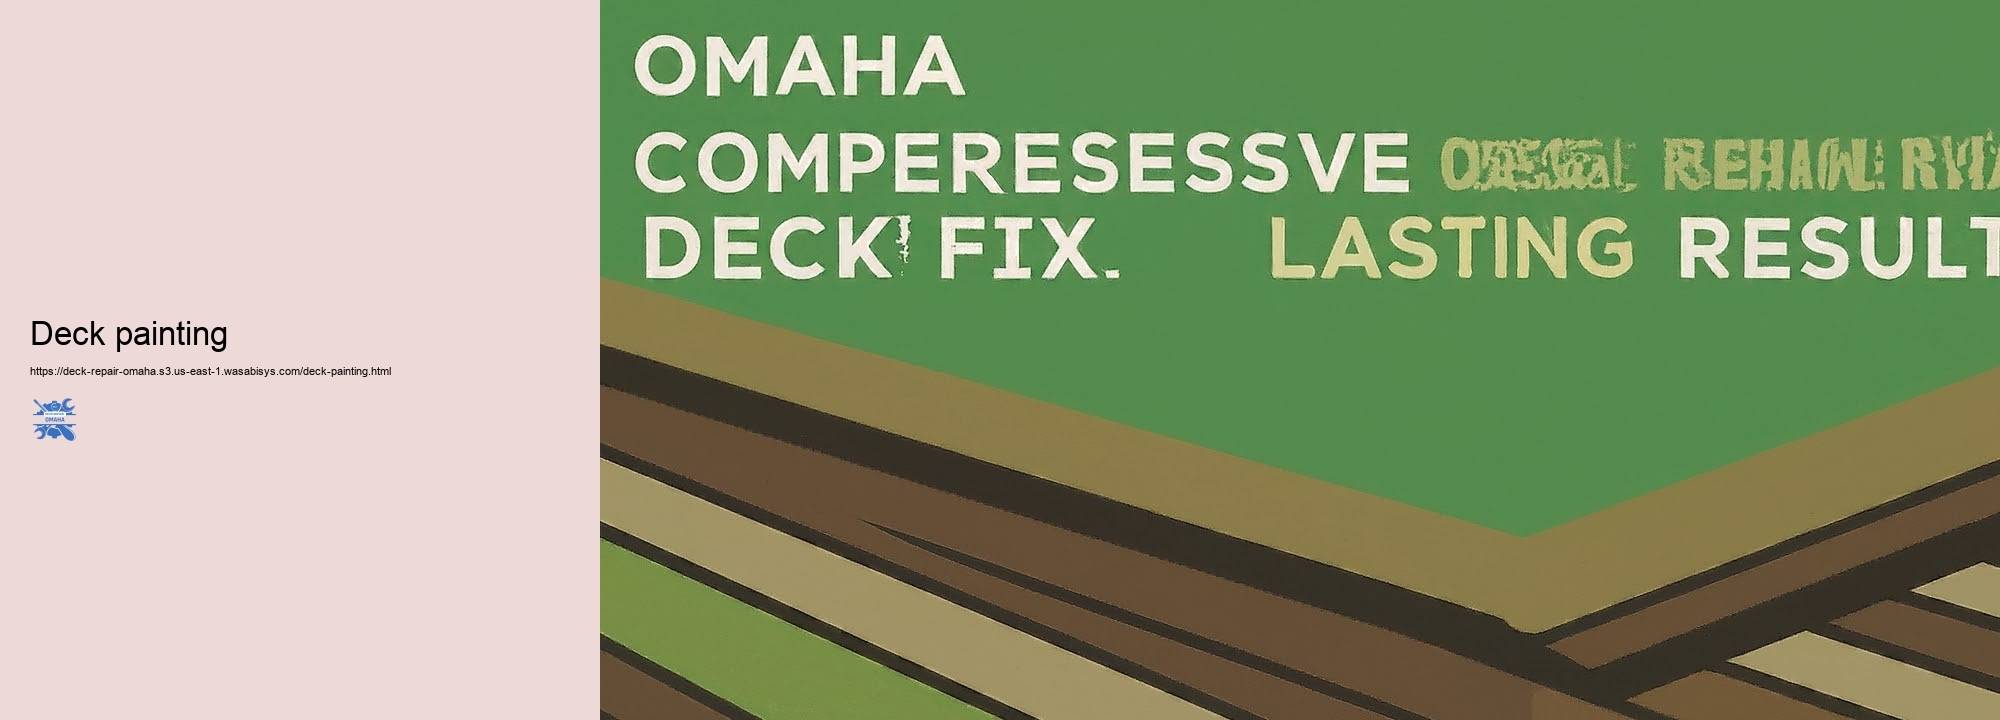 Affordable Deck Repair Work Solutions for Omaha Homeowners